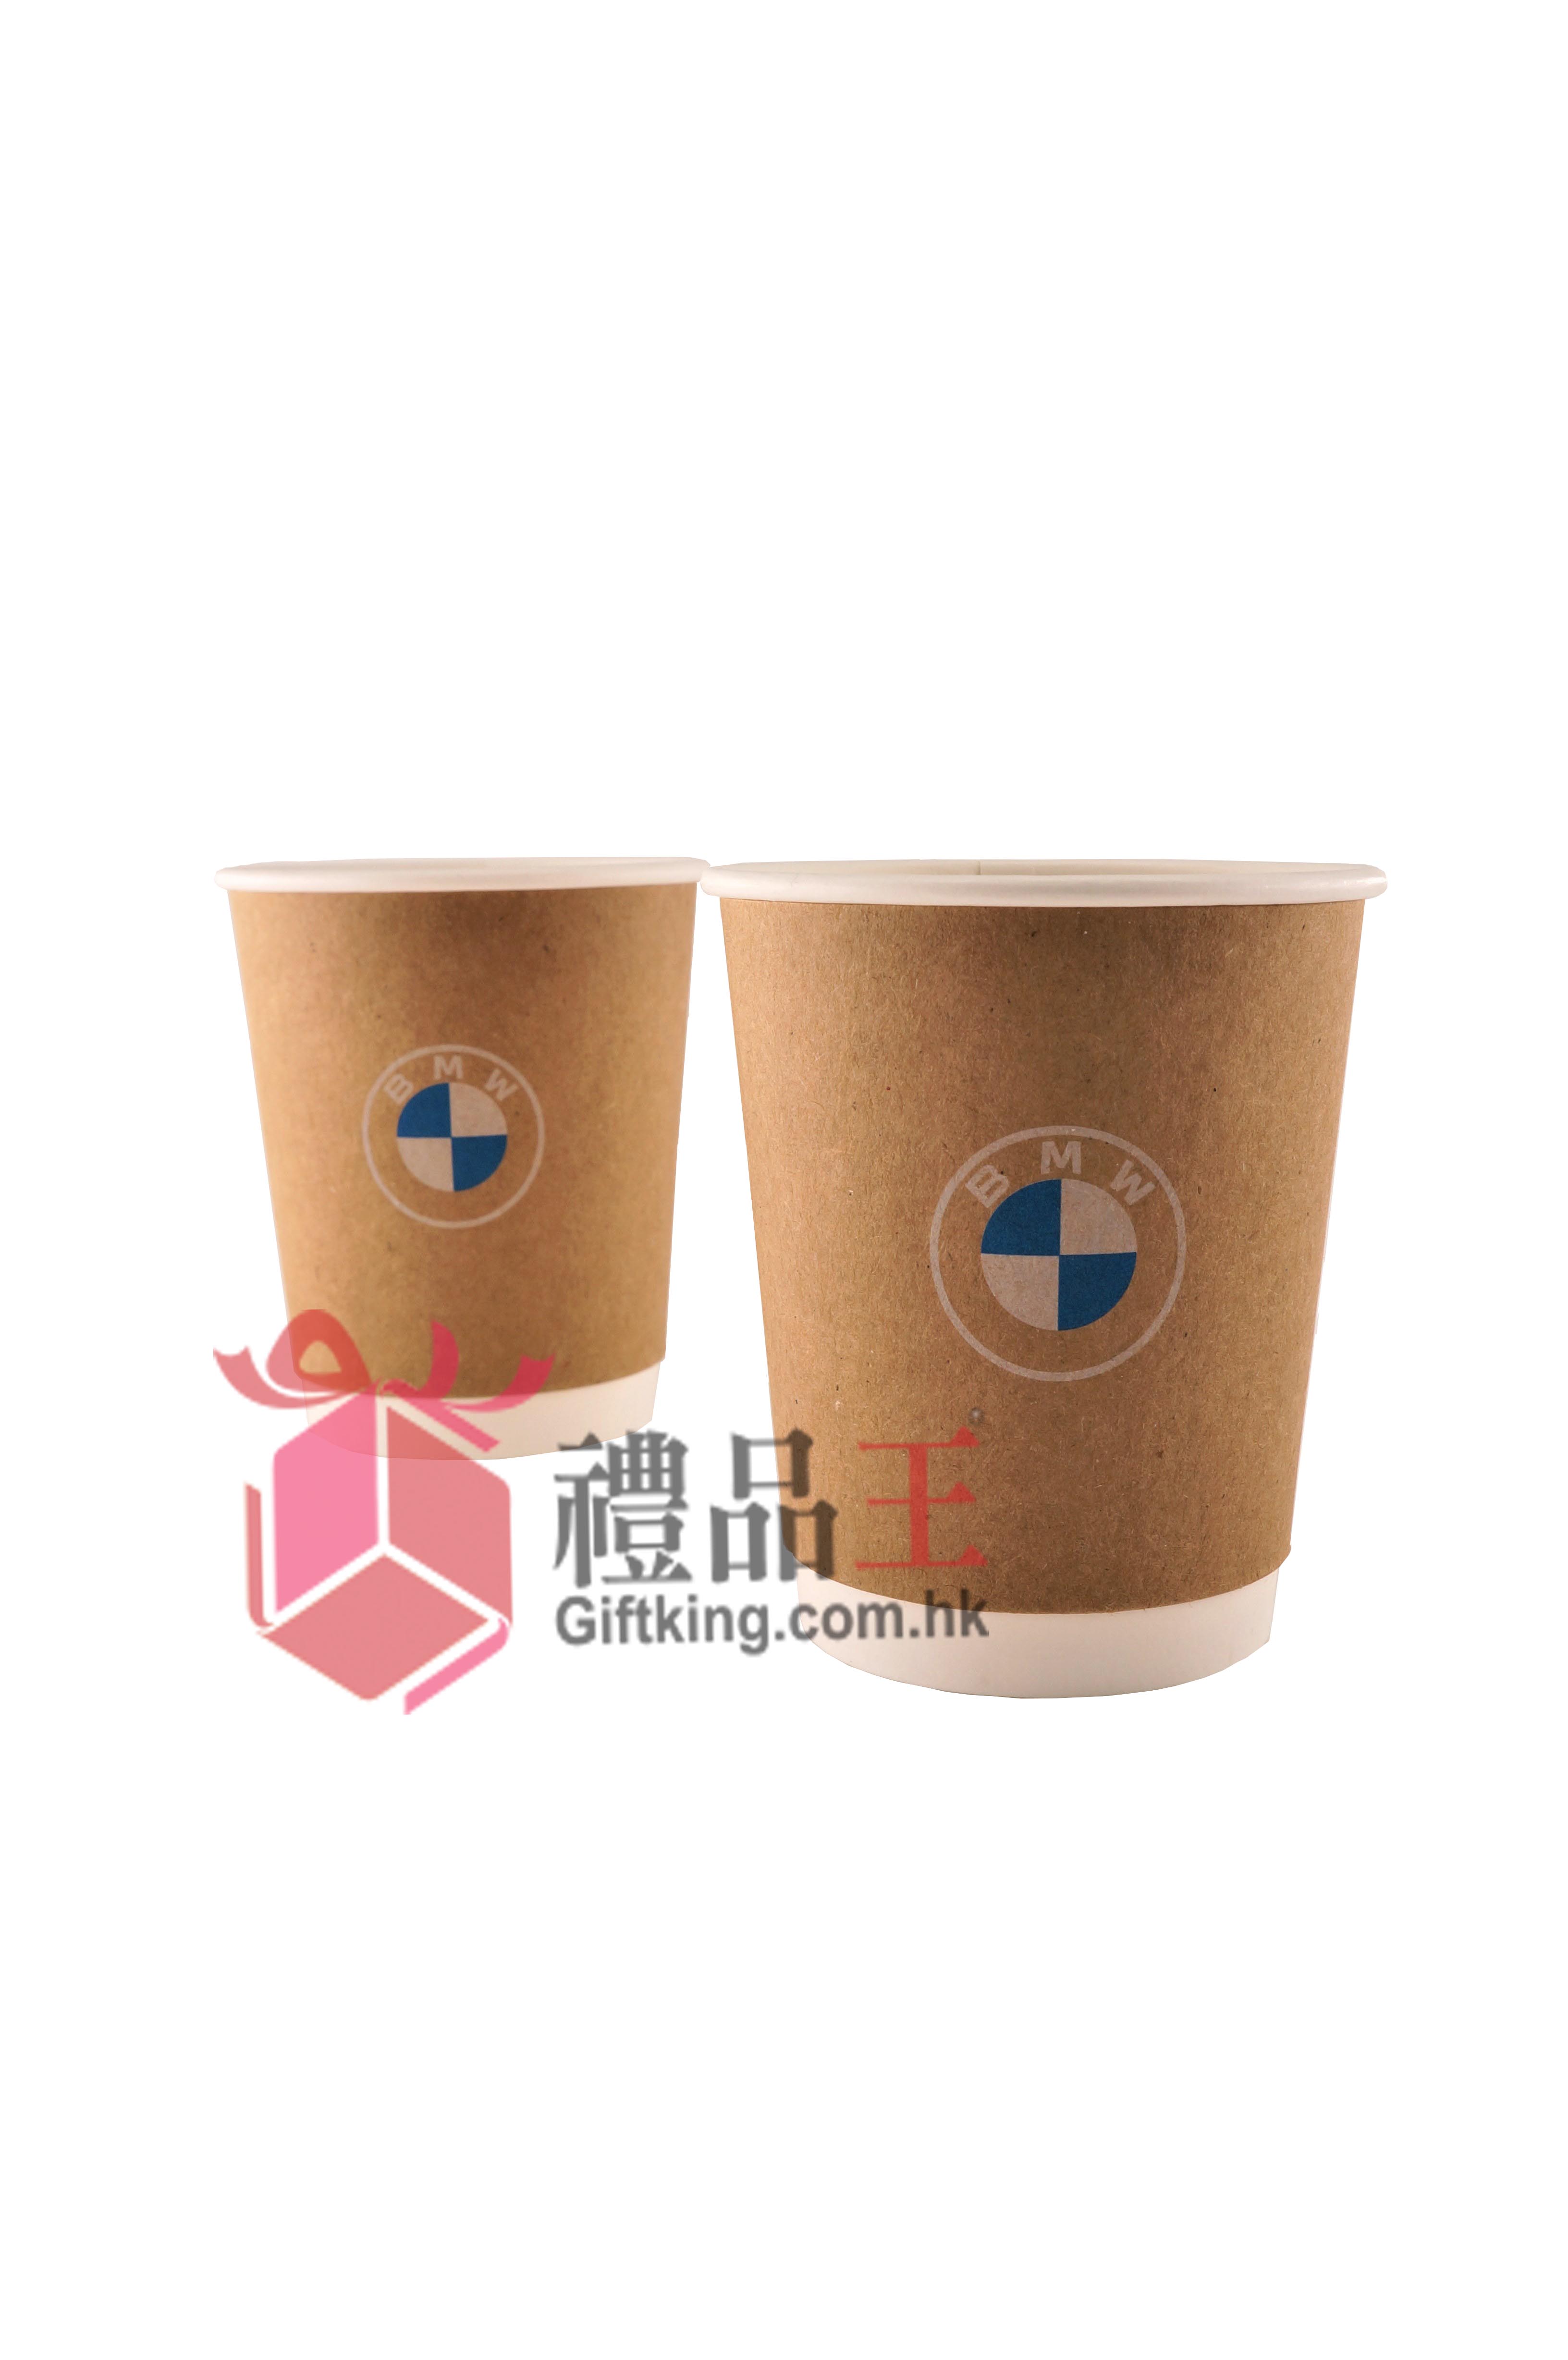 BMW Color Printing Advertising Paper Cup (Homeware Gift)